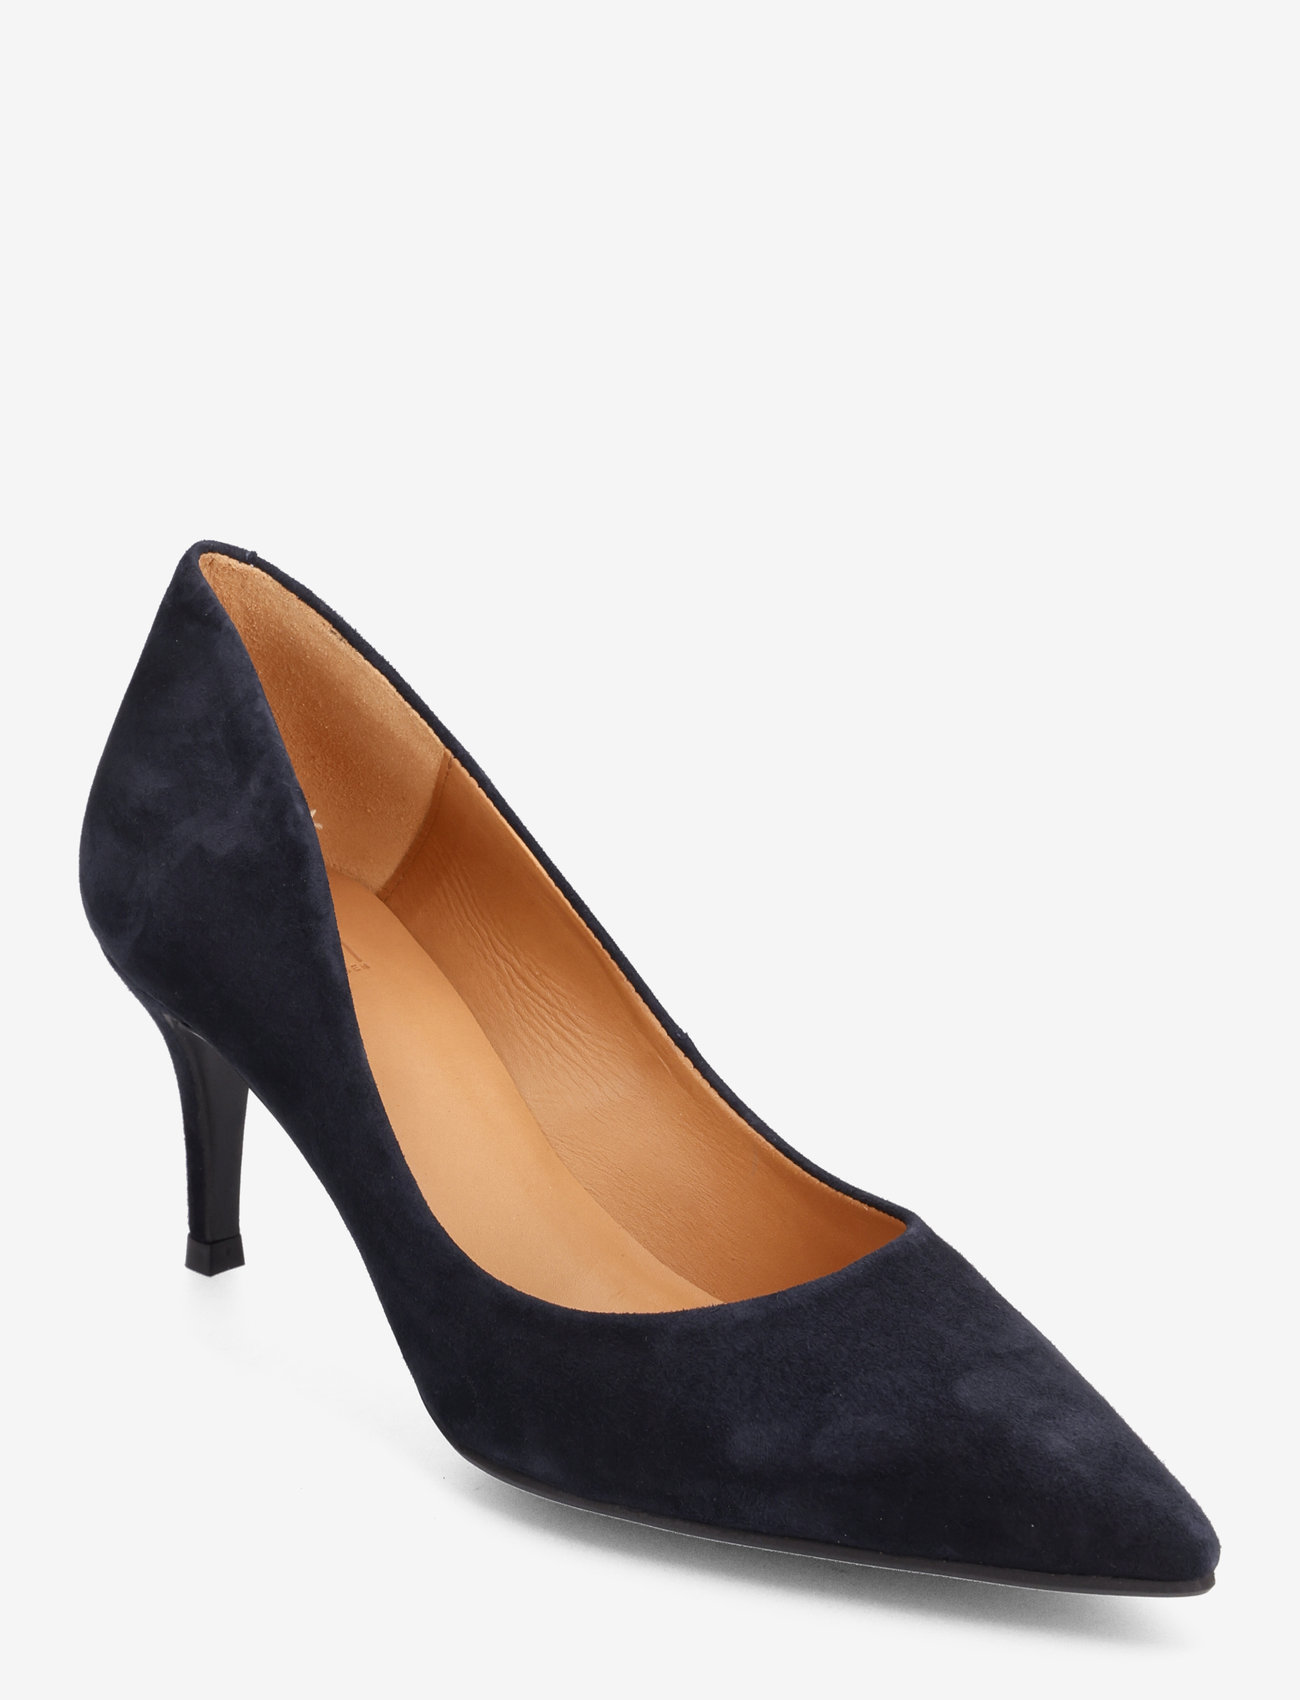 Billi Bi - Pumps - party wear at outlet prices - navy suede - 0